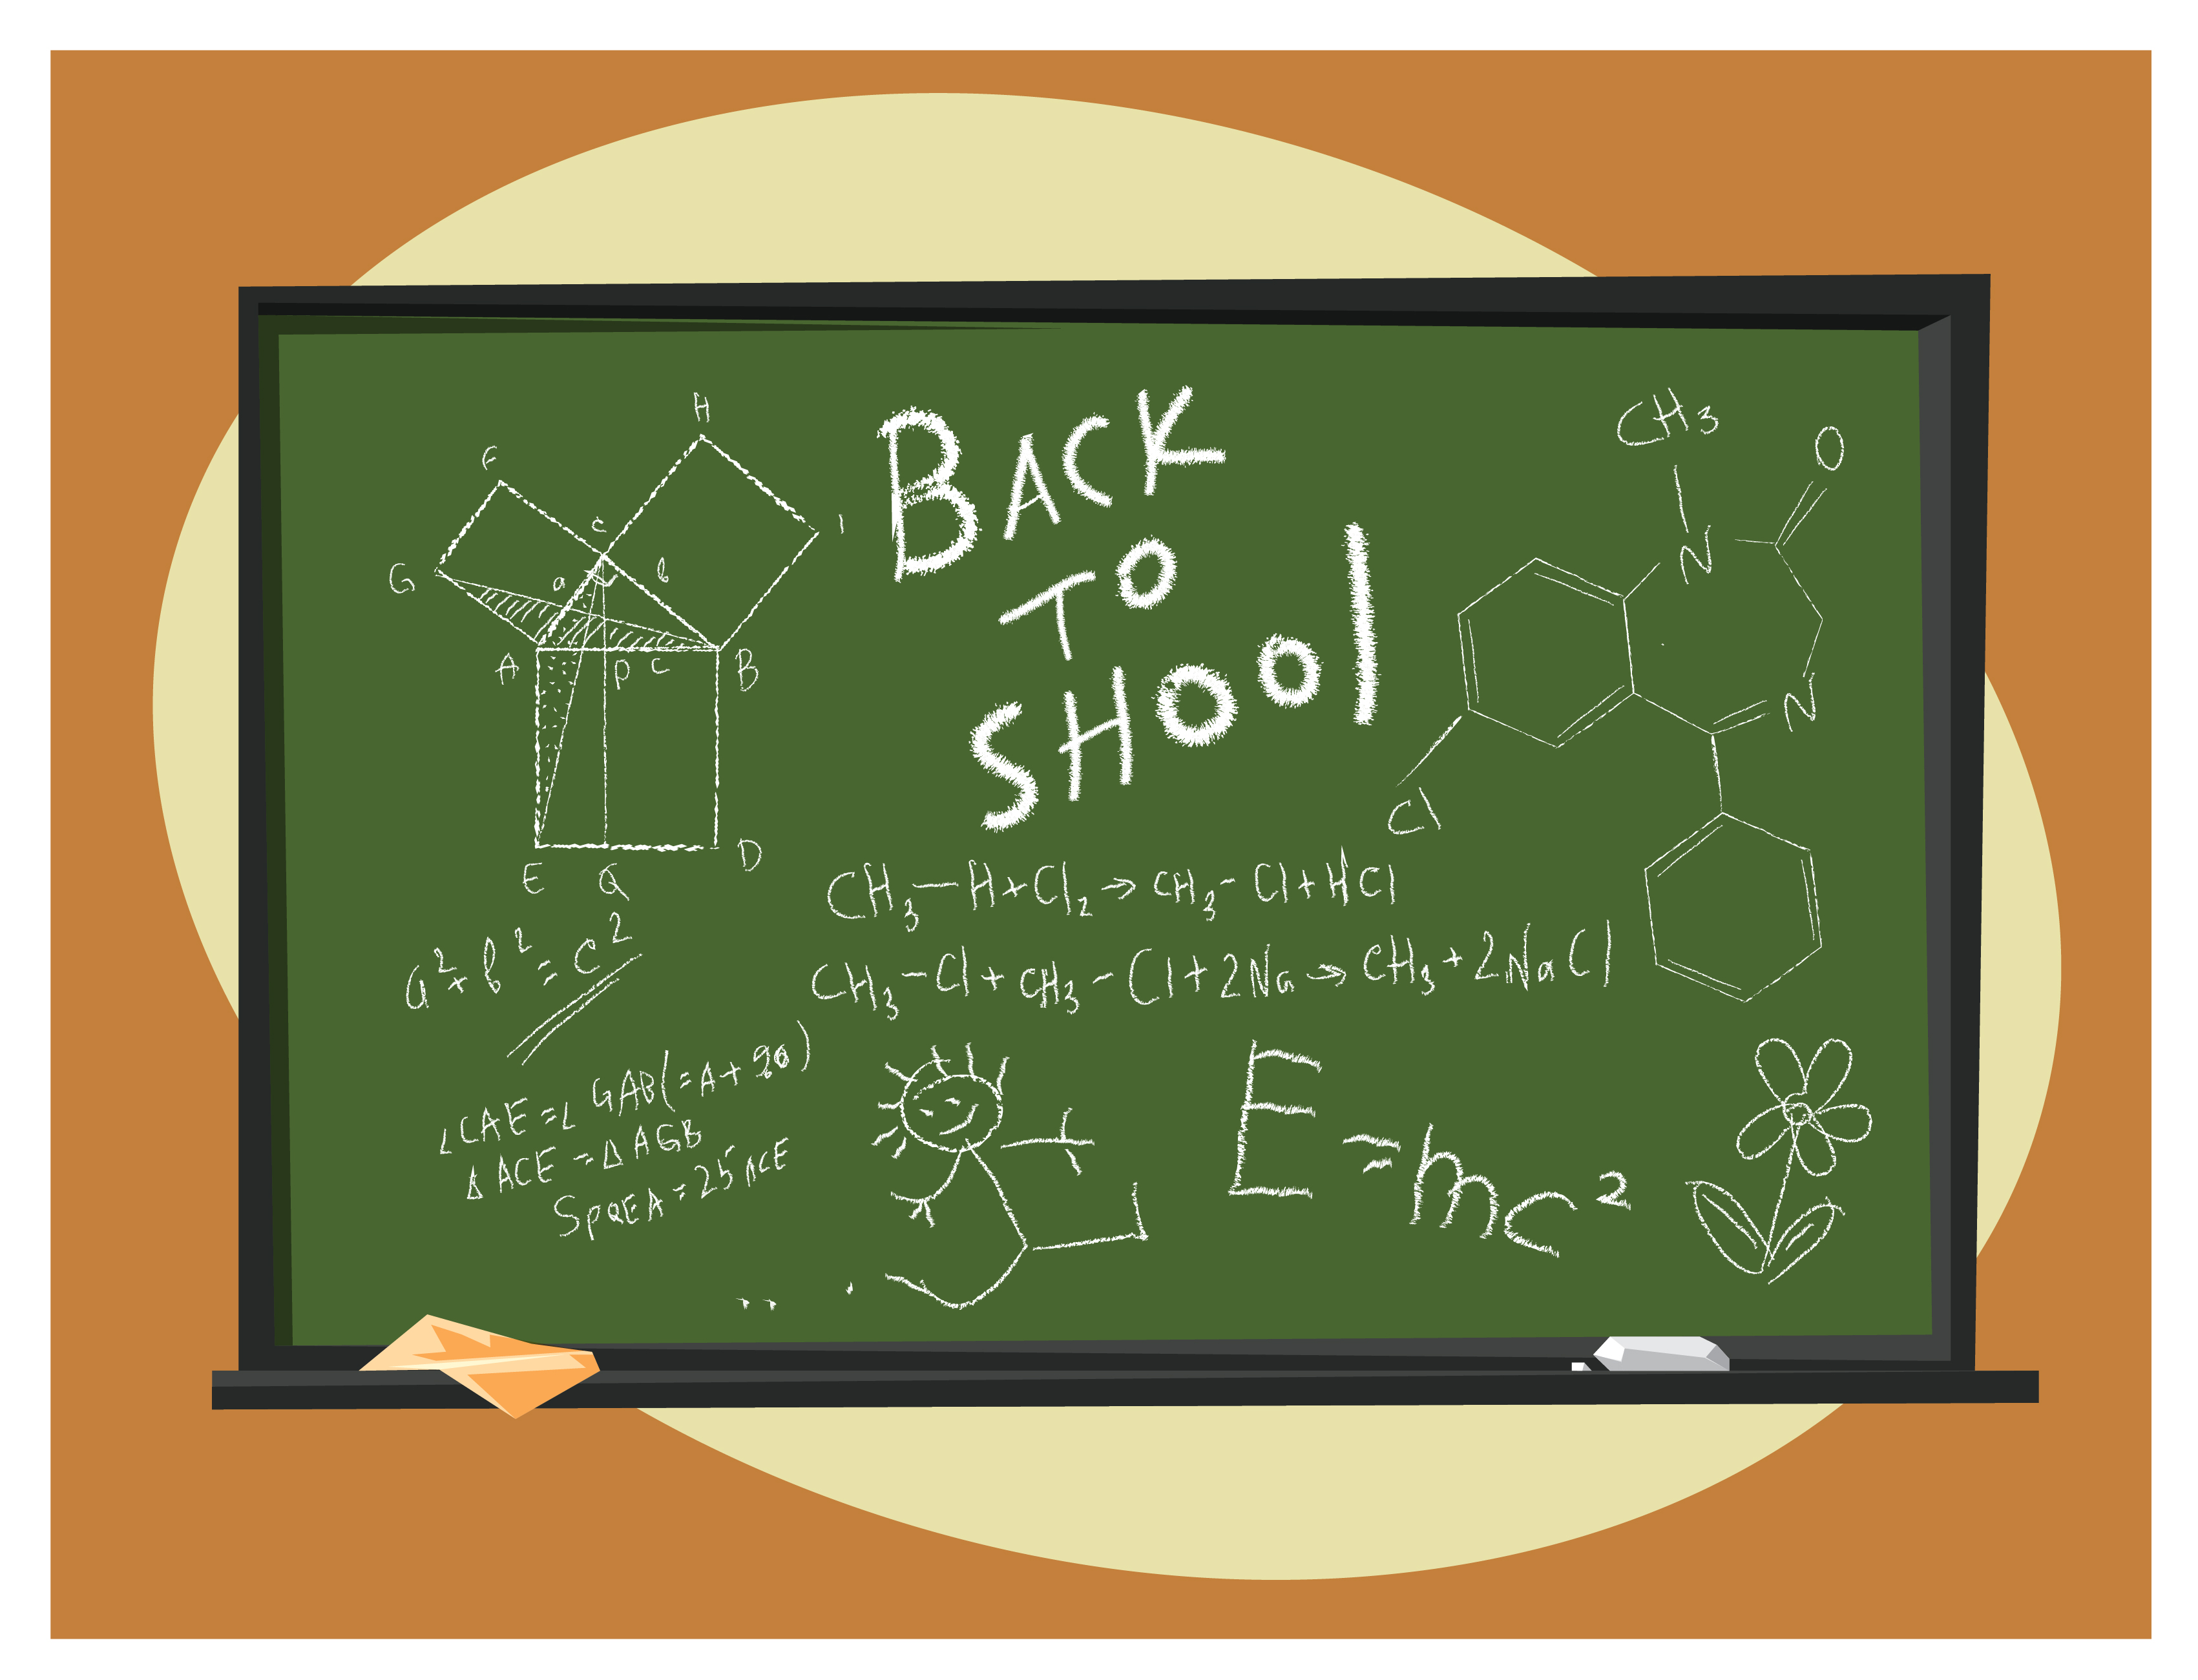 Education objects vector illustration for design Photoshop brush